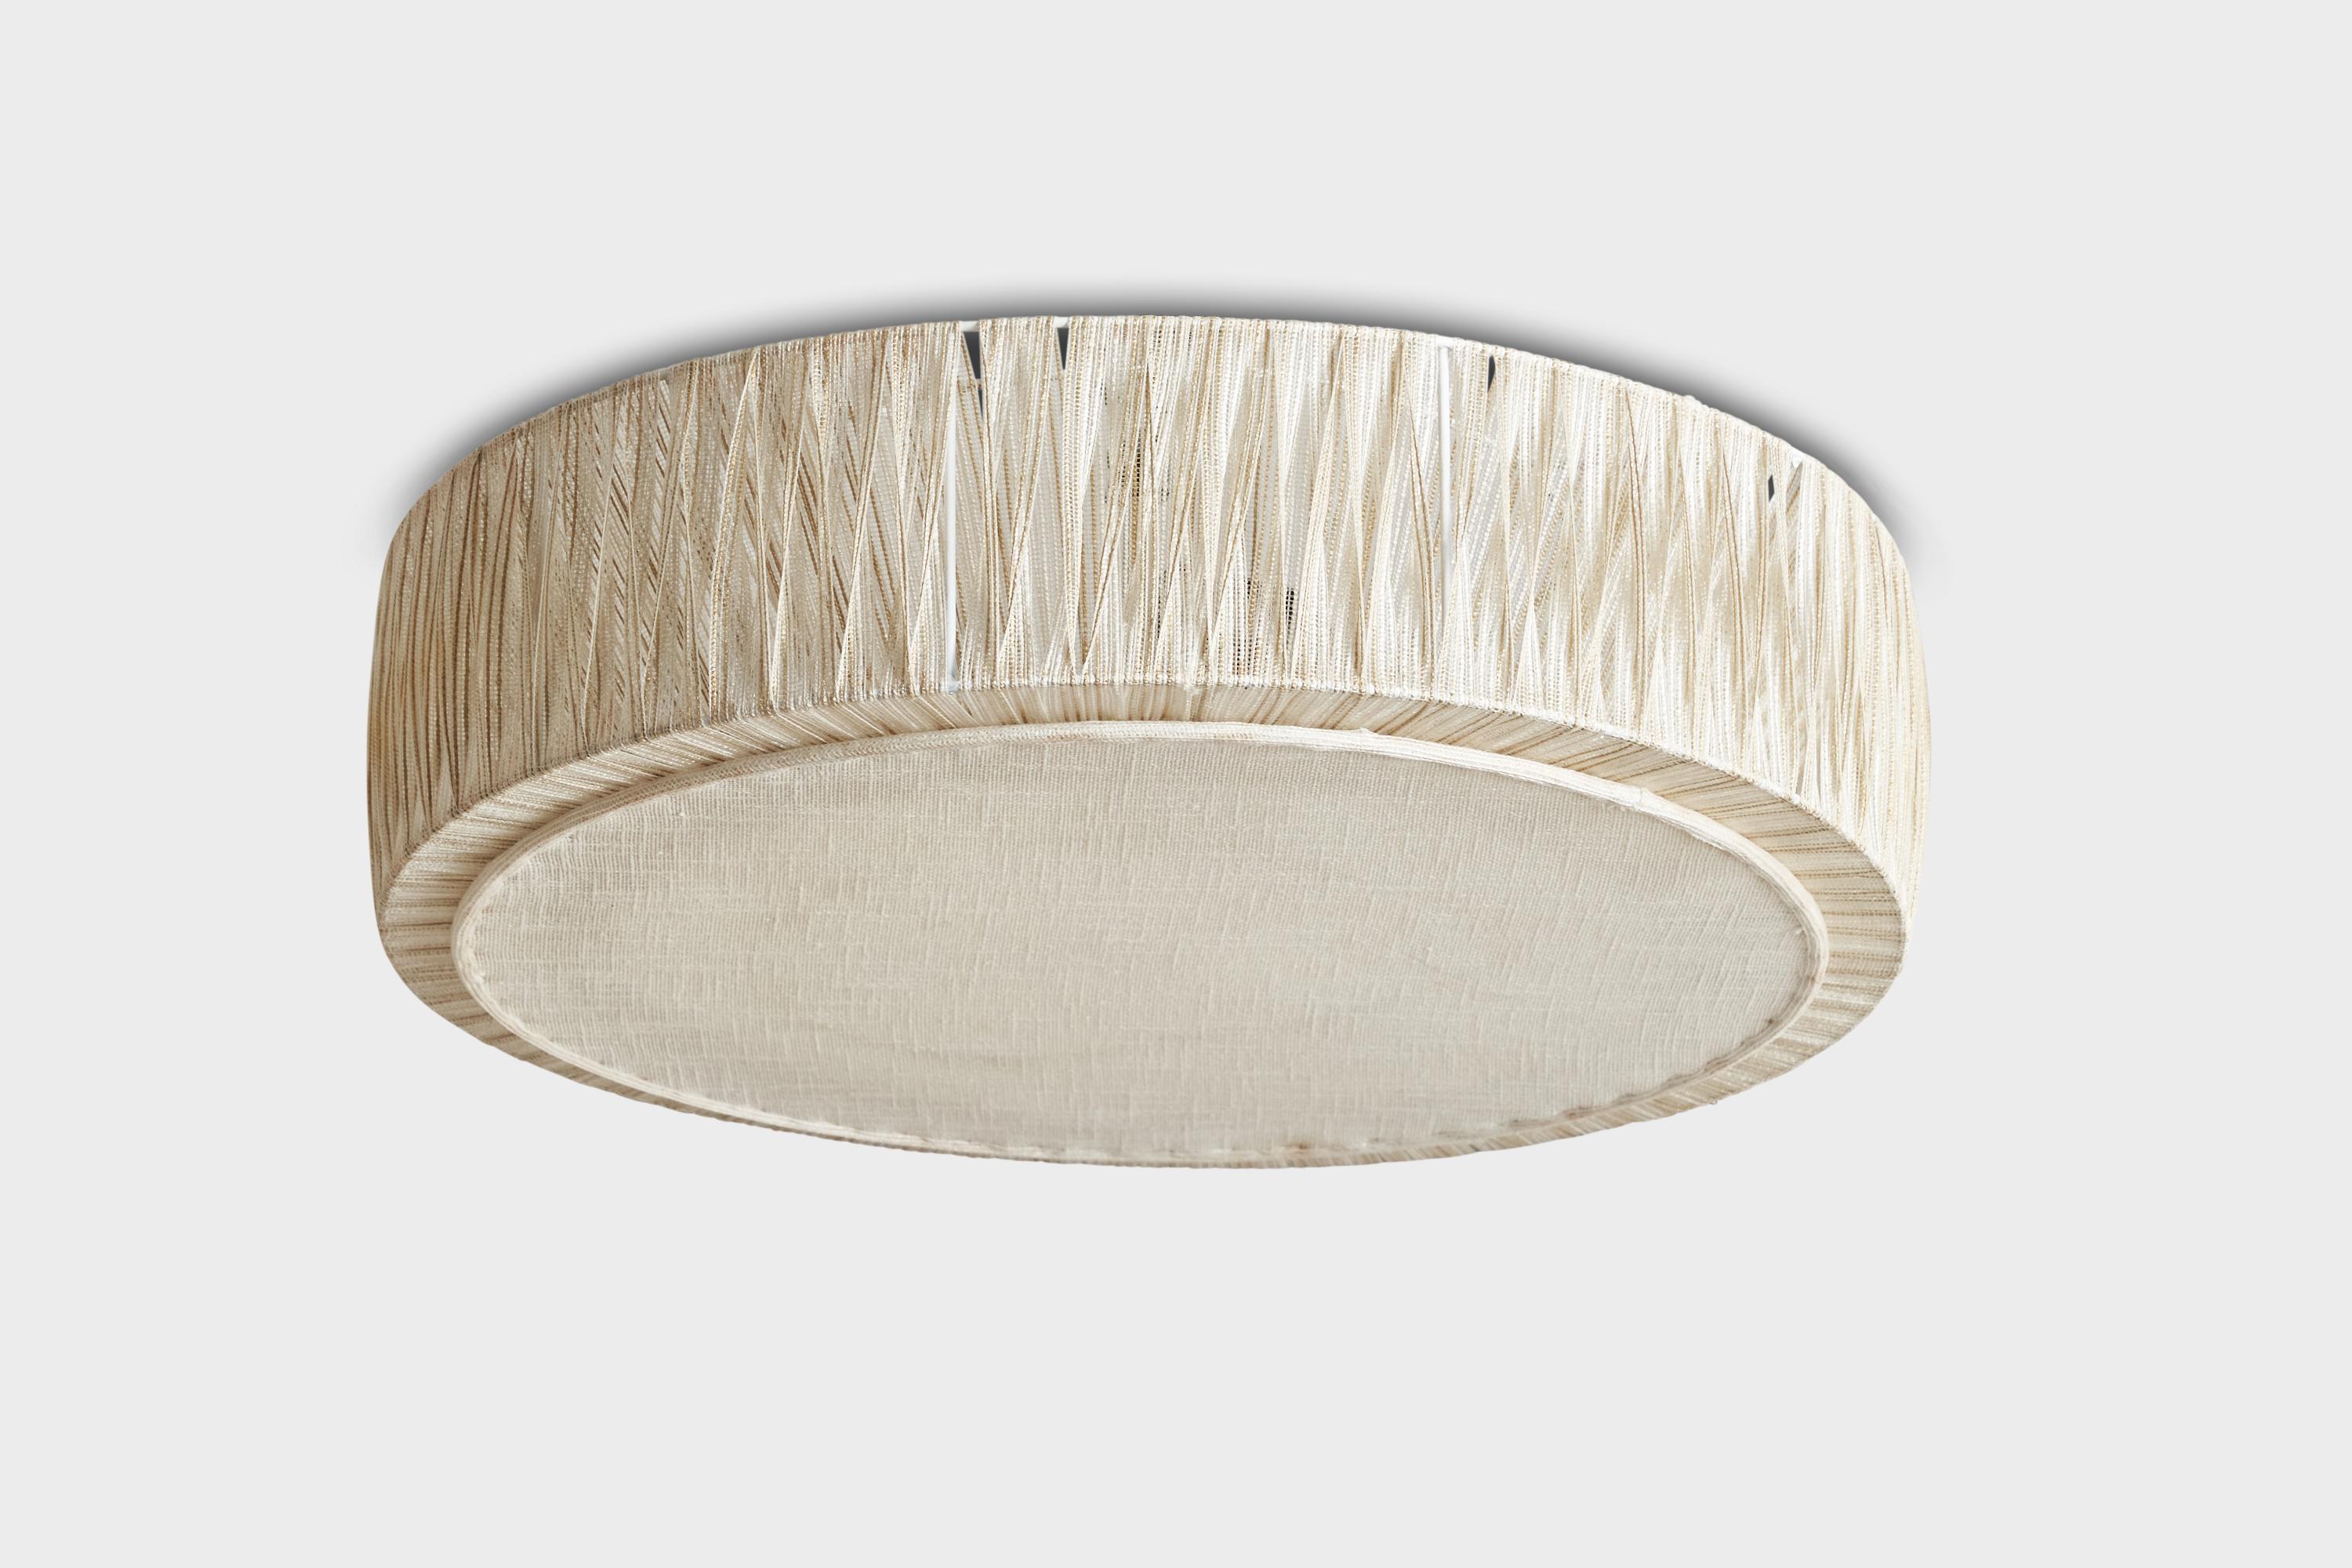 An off-white fabric flush mount designed and produced in Sweden, 1960s.

Dimensions of canopy (inches): N/A
Socket takes standard E-26 bulbs. 2 sockets.There is no maximum wattage stated on the fixture. All lighting will be converted for US usage.